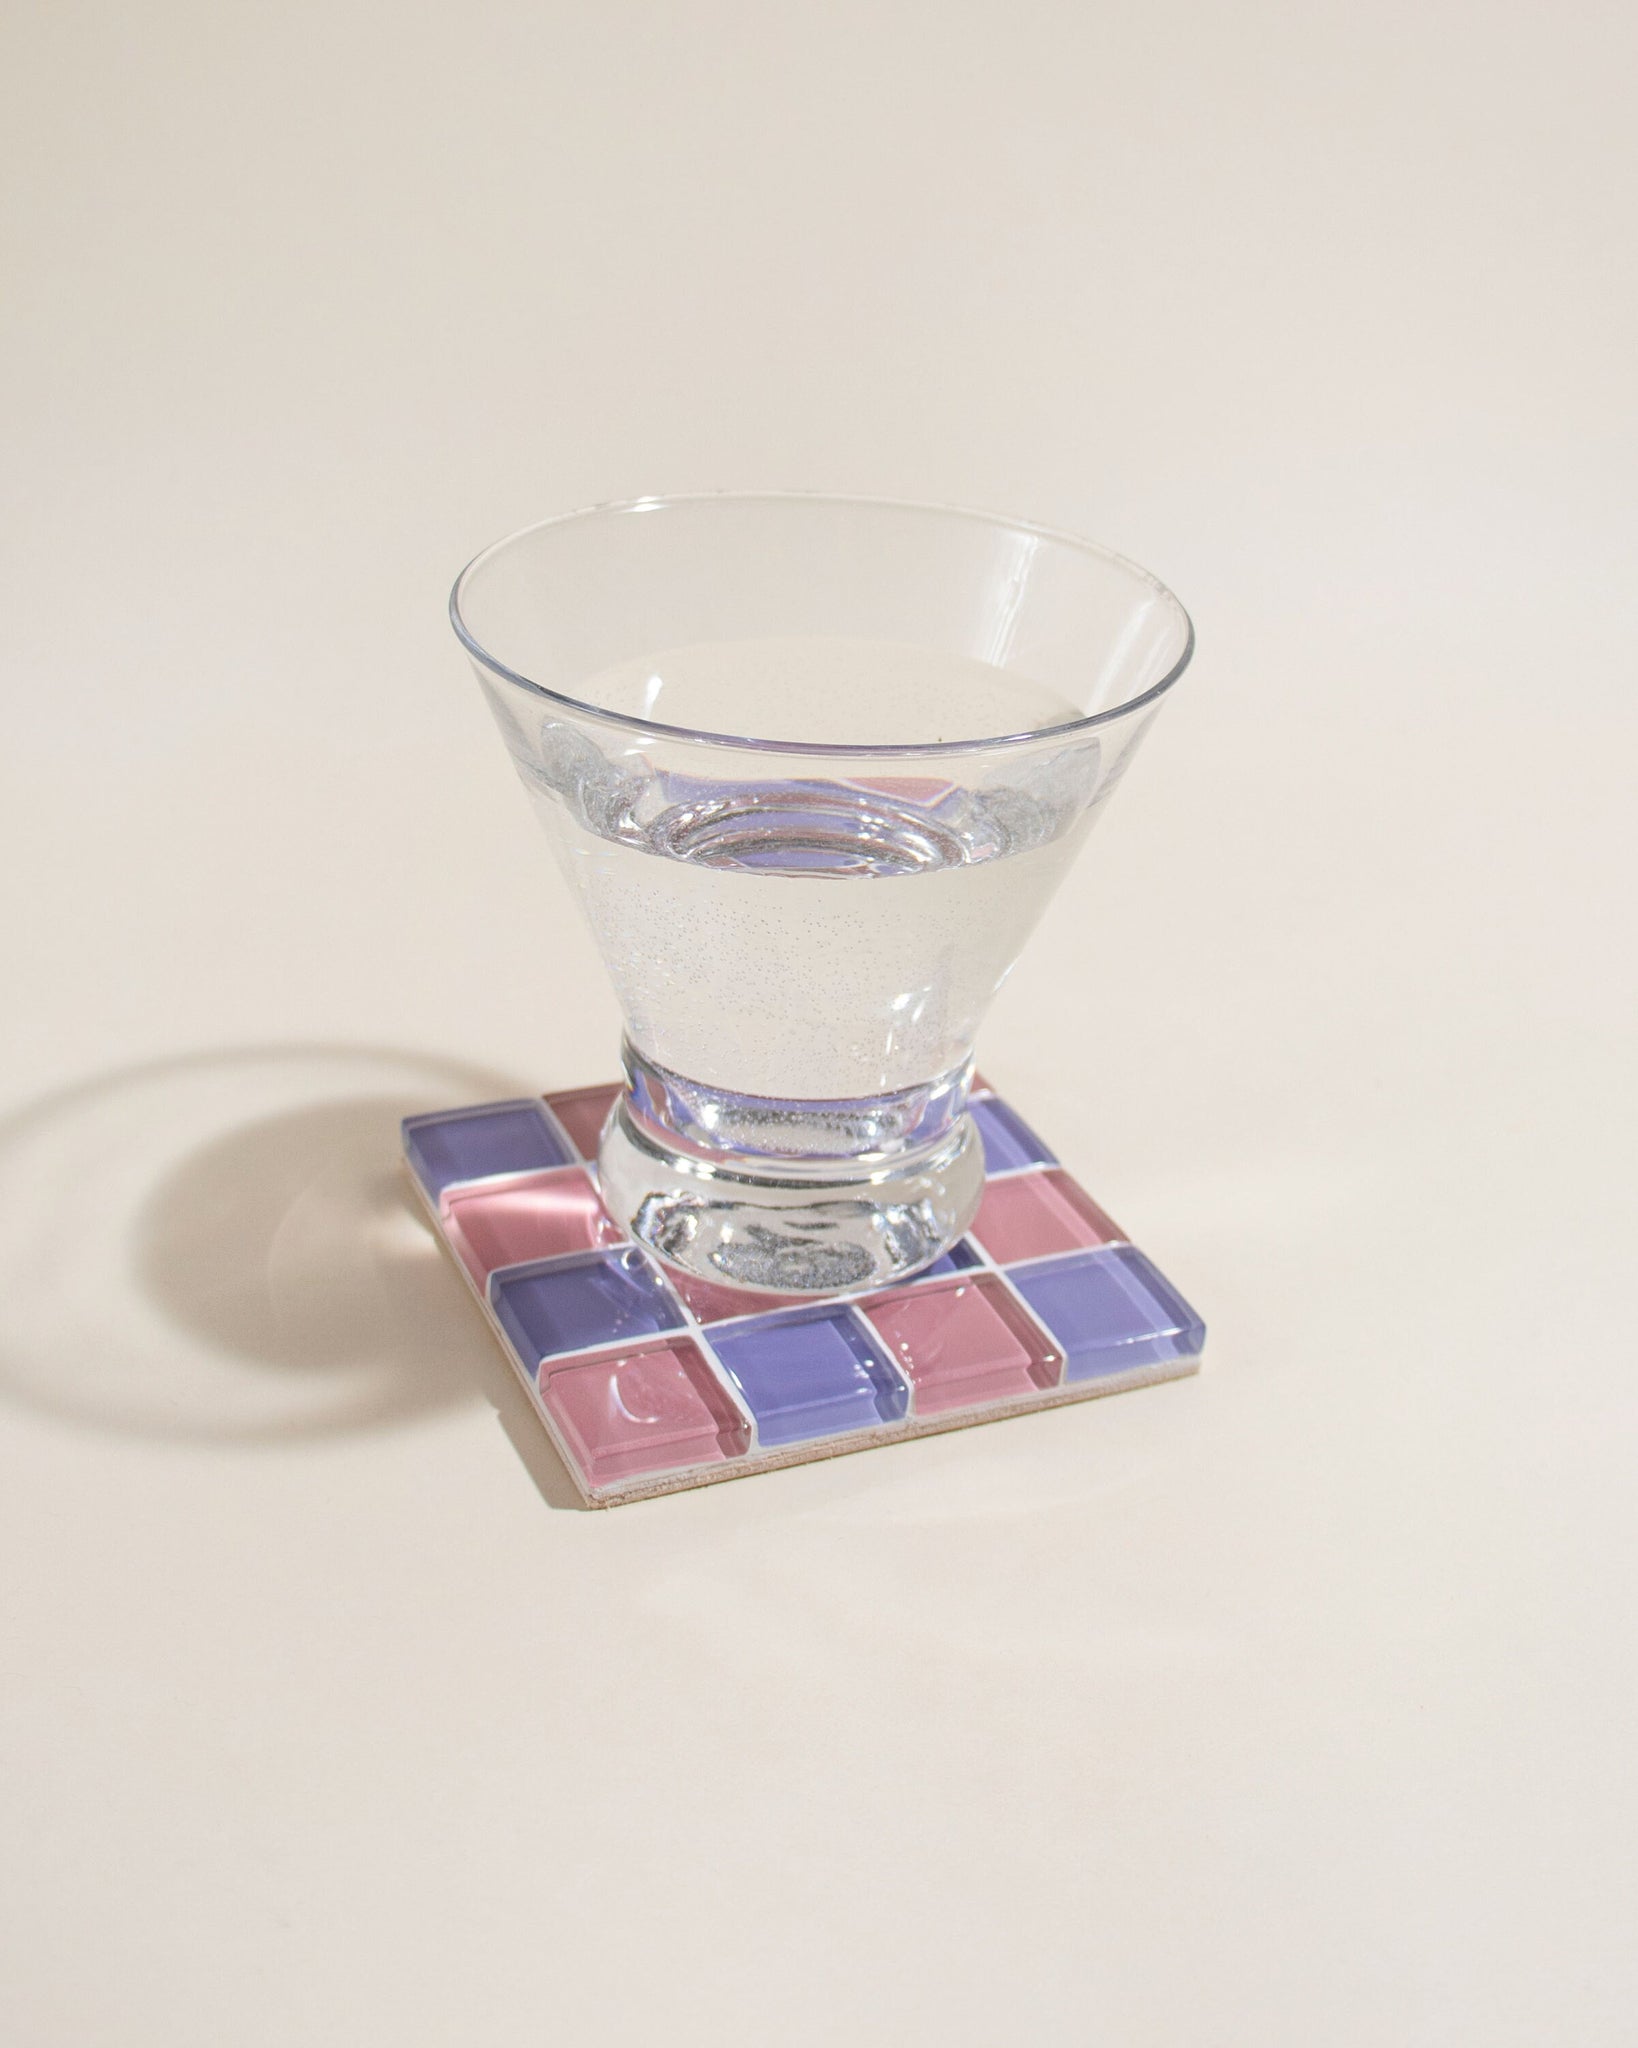 Checkered Glass Tile Coaster | Handmade Drink Coaster | Square Coaster | Housewarming Gift | Gift for Her | Gift for Him | Valentine Gift 3